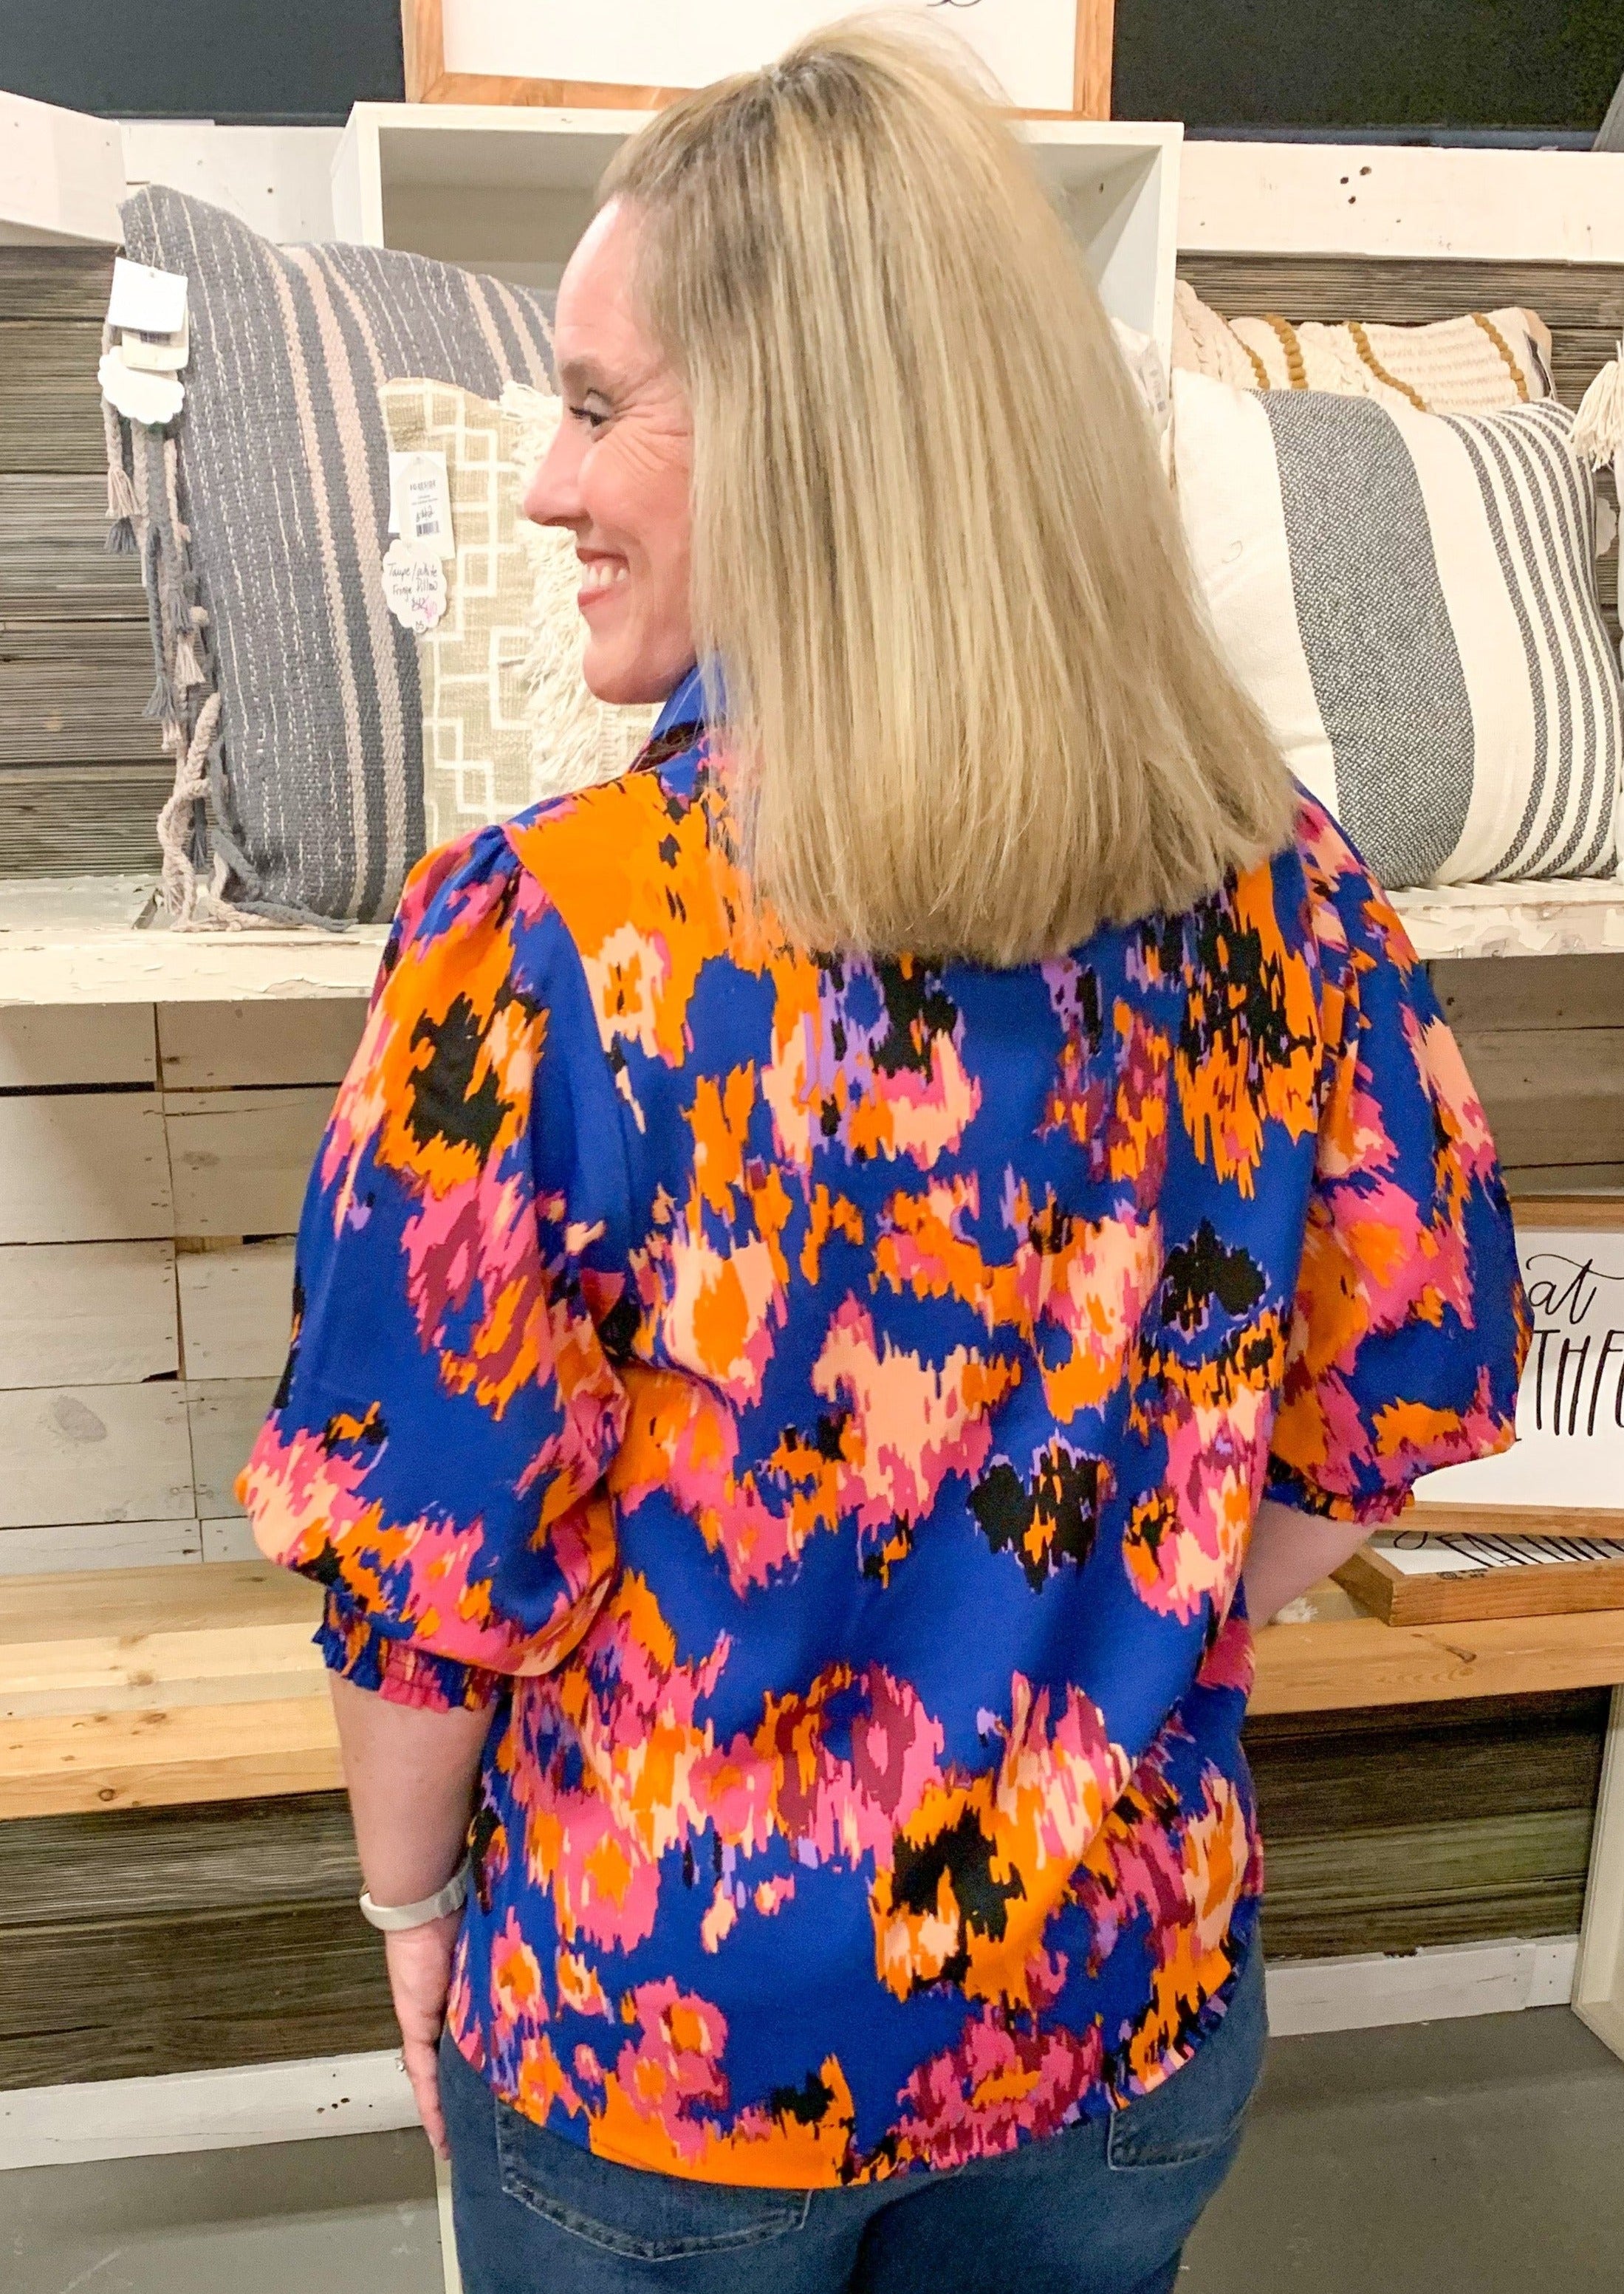 back of blue pink yellow and orange abstract print satin blouse. Has slight V neck, collar, and a puff sleeve with a wide elastic banded cuff near elbow.